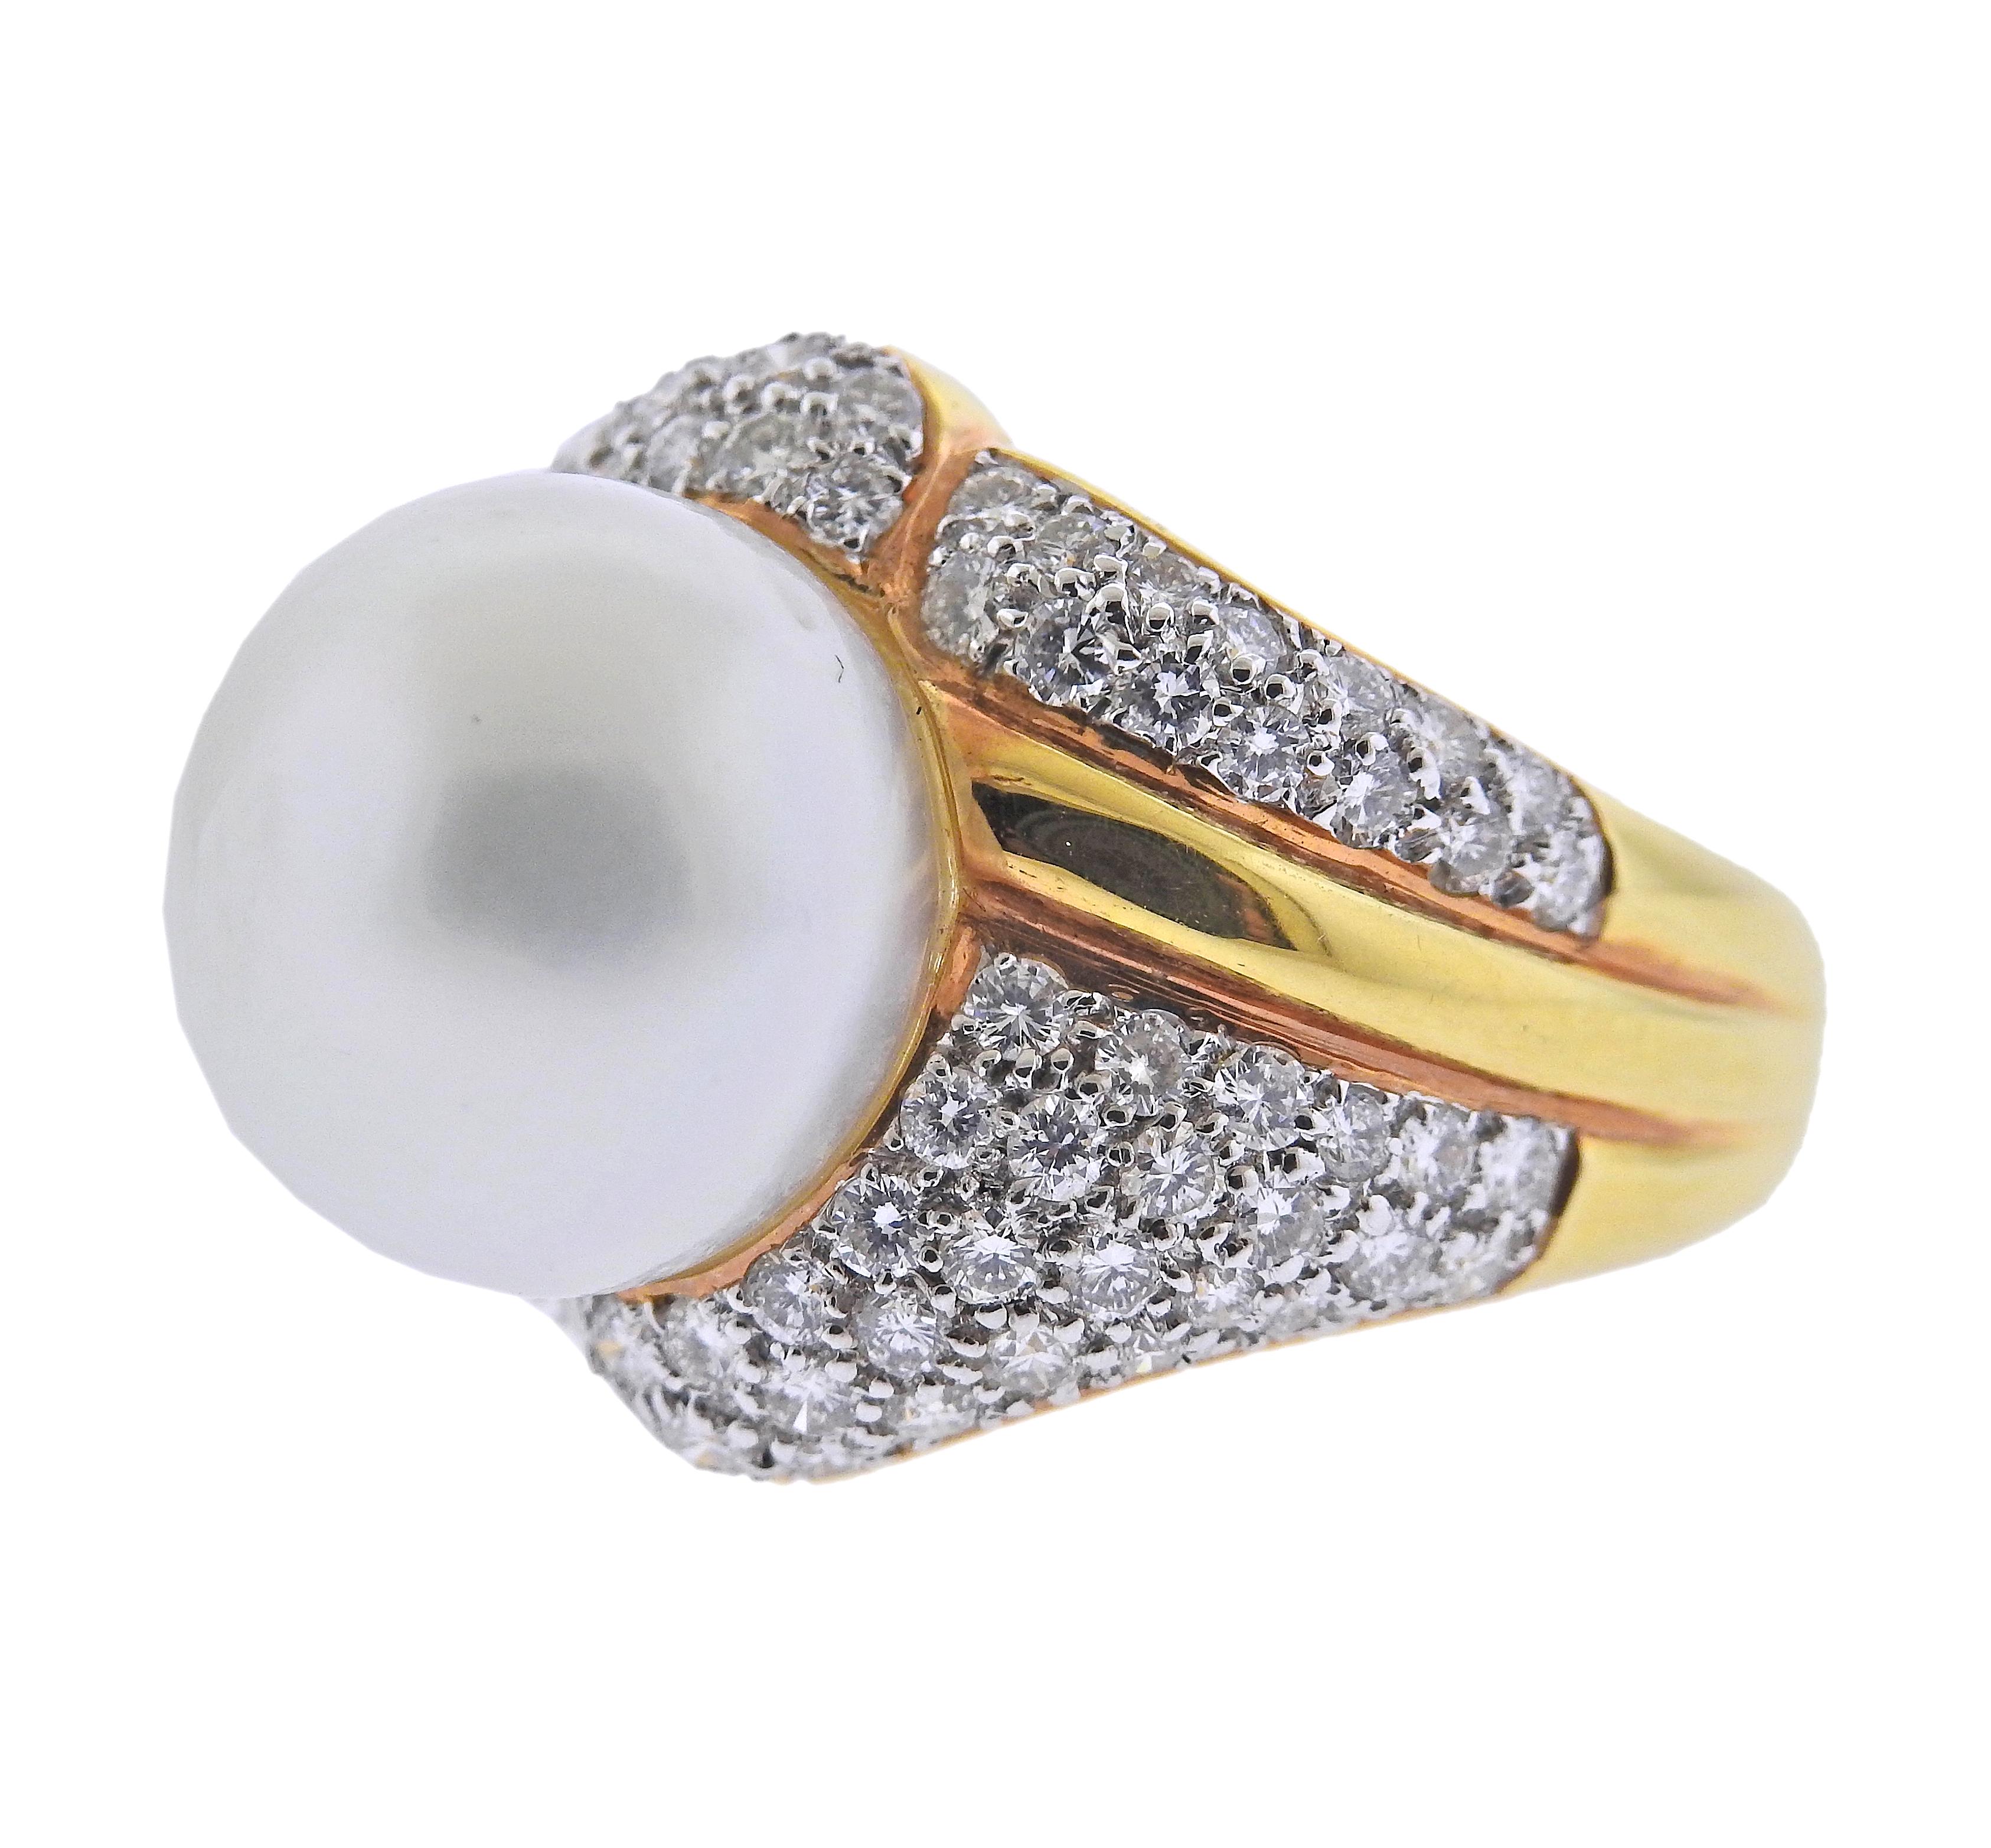 18k yellow gold cocktail ring, with center 13.9mm South Sea pearl, surrounded with approx. 1.80ctw in diamonds. Ring size - 7, ring top - 20mm wide. Marked: MXM 750. Weight - 13.9 grams. 